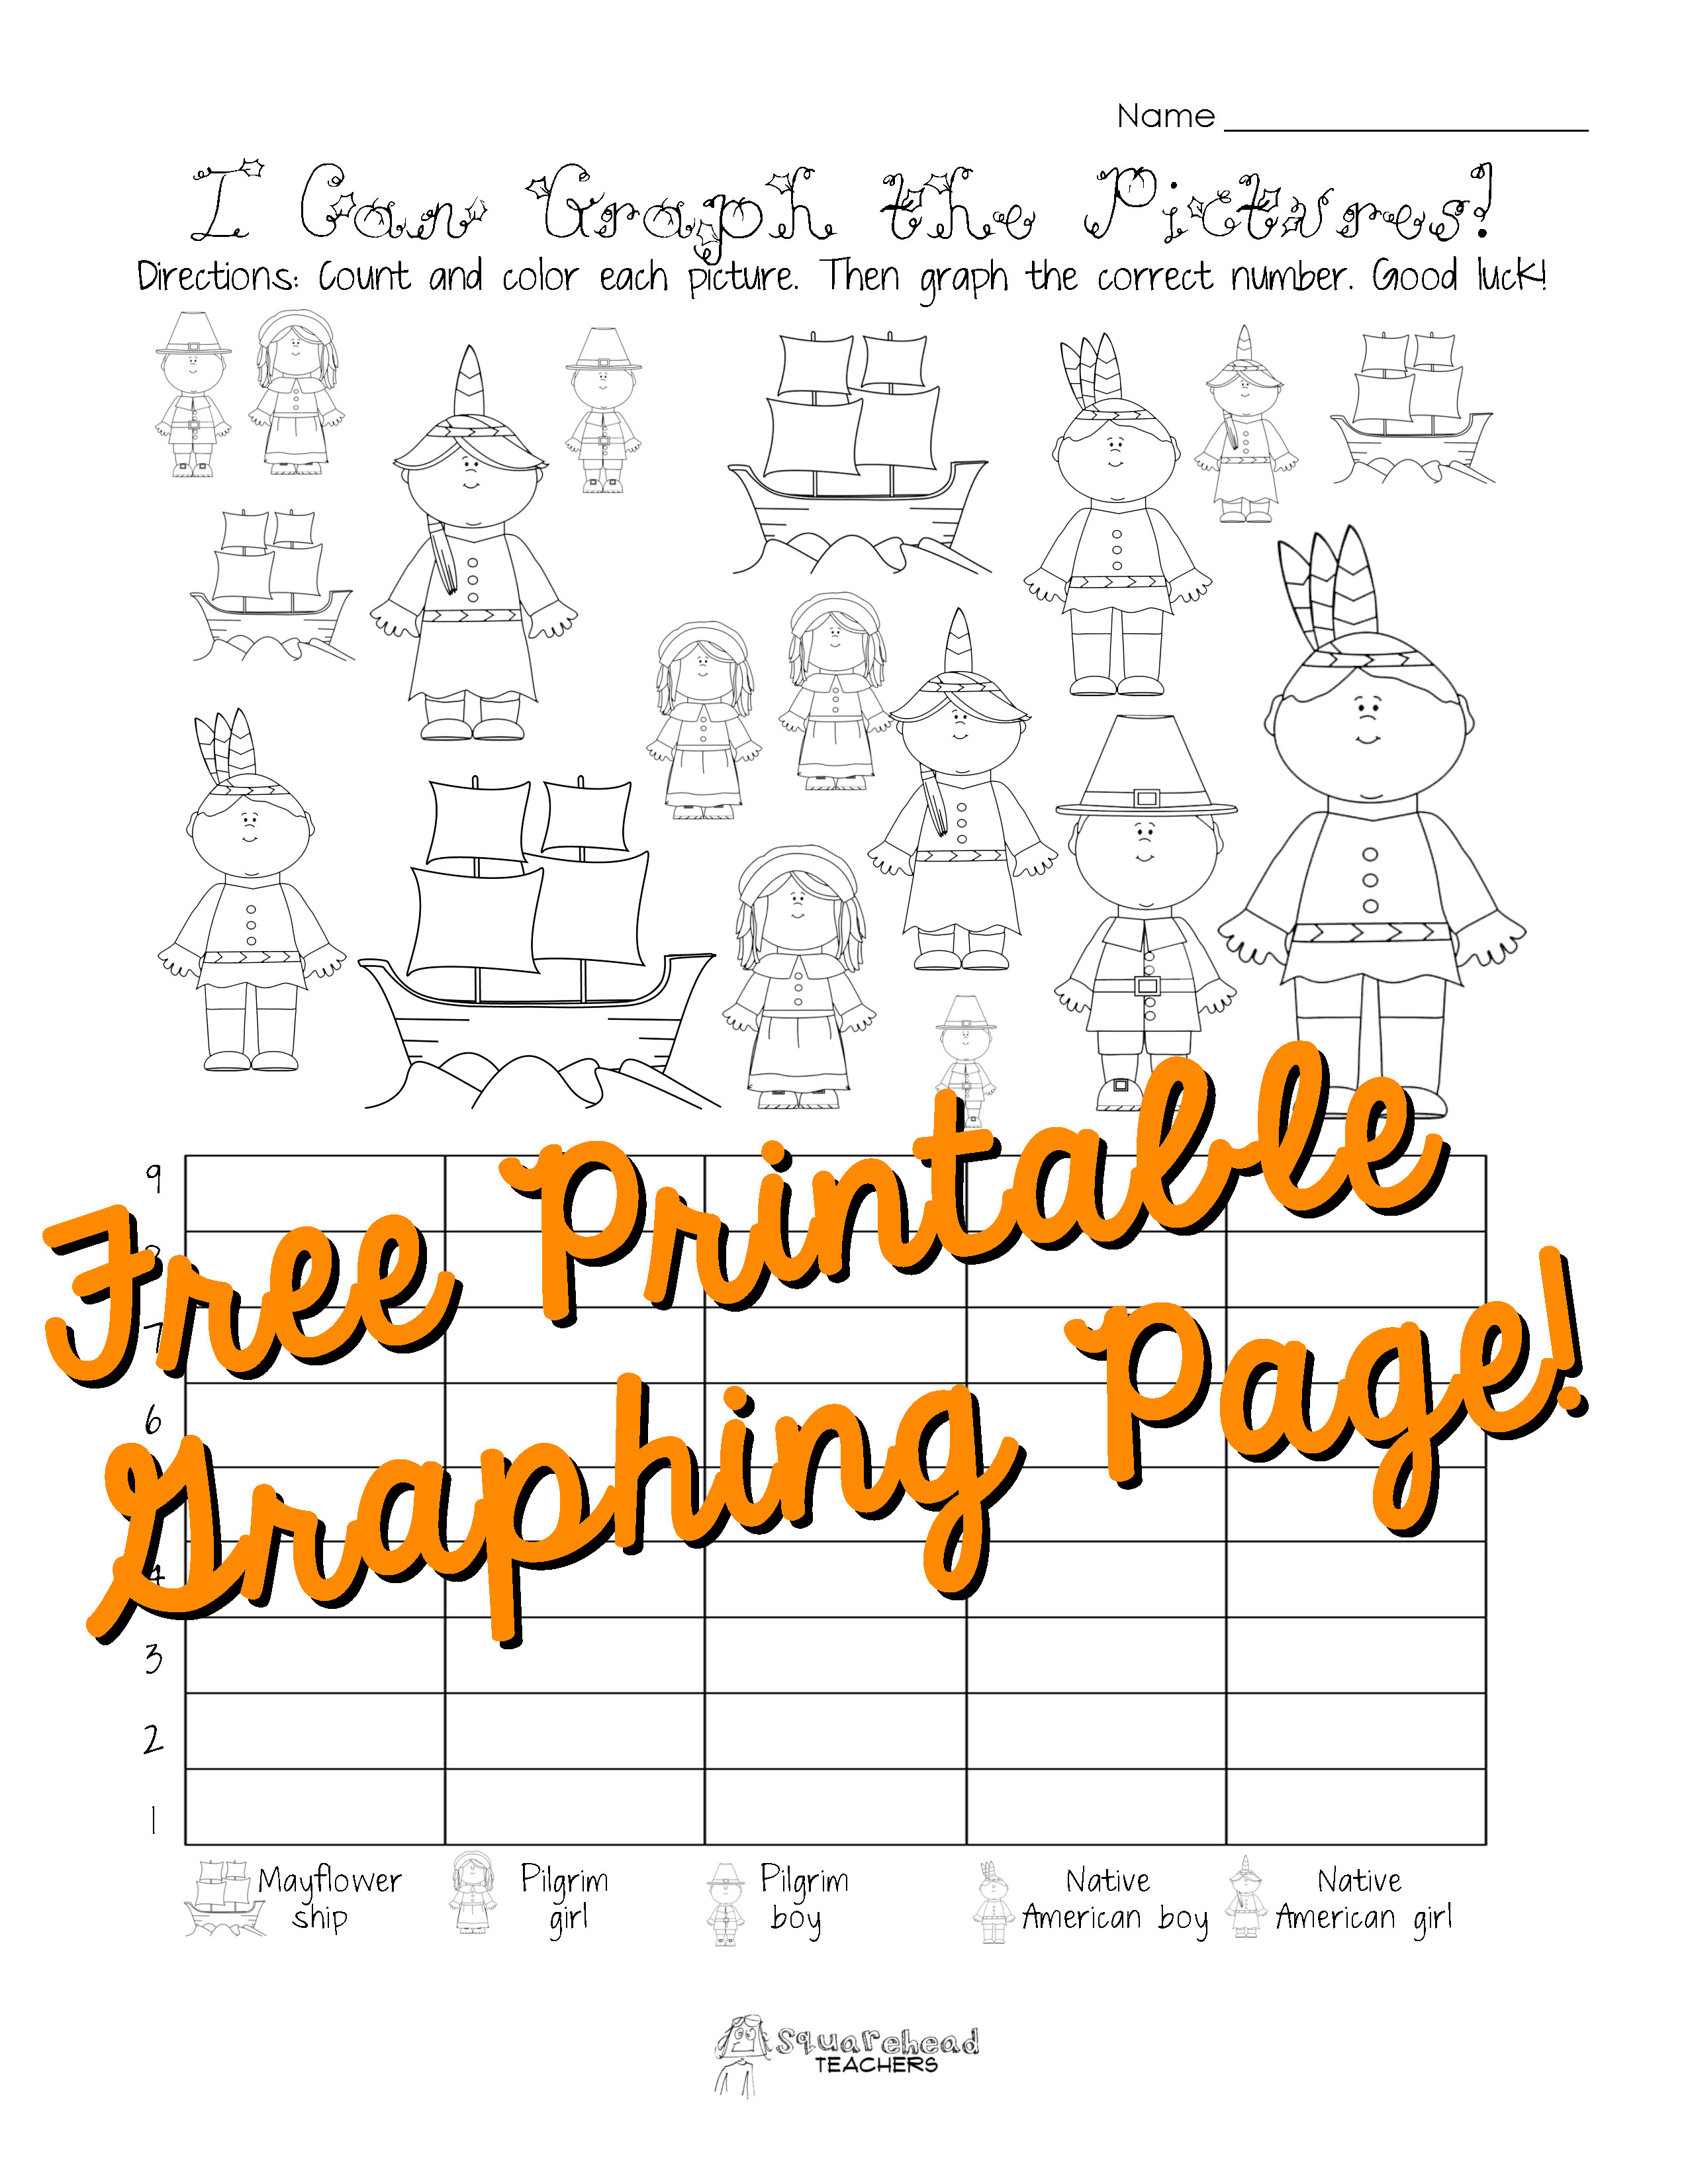 Graphing Worksheets for First Grade Free Thanksgiving Graphing Worksheet Kindergarten First